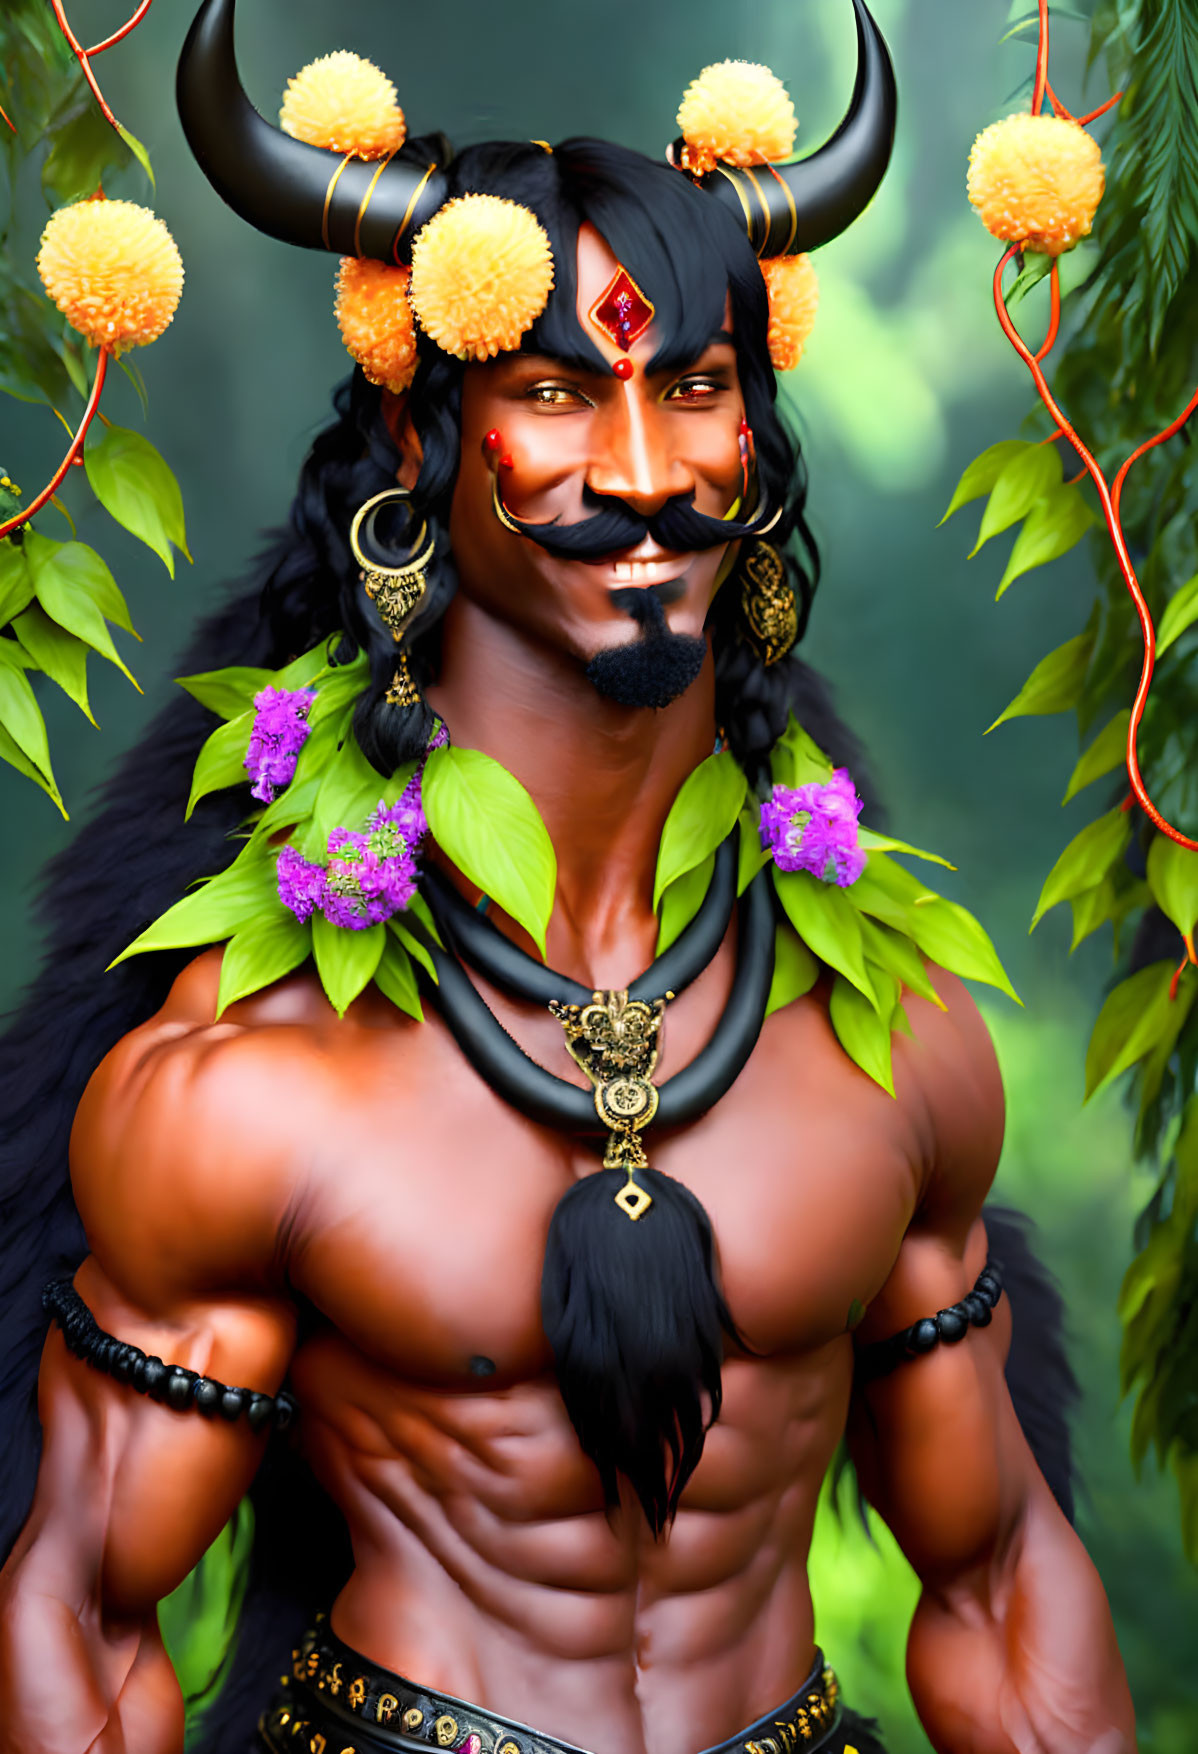 Fantasy illustration of man with horns and festive adornments in lush forest.